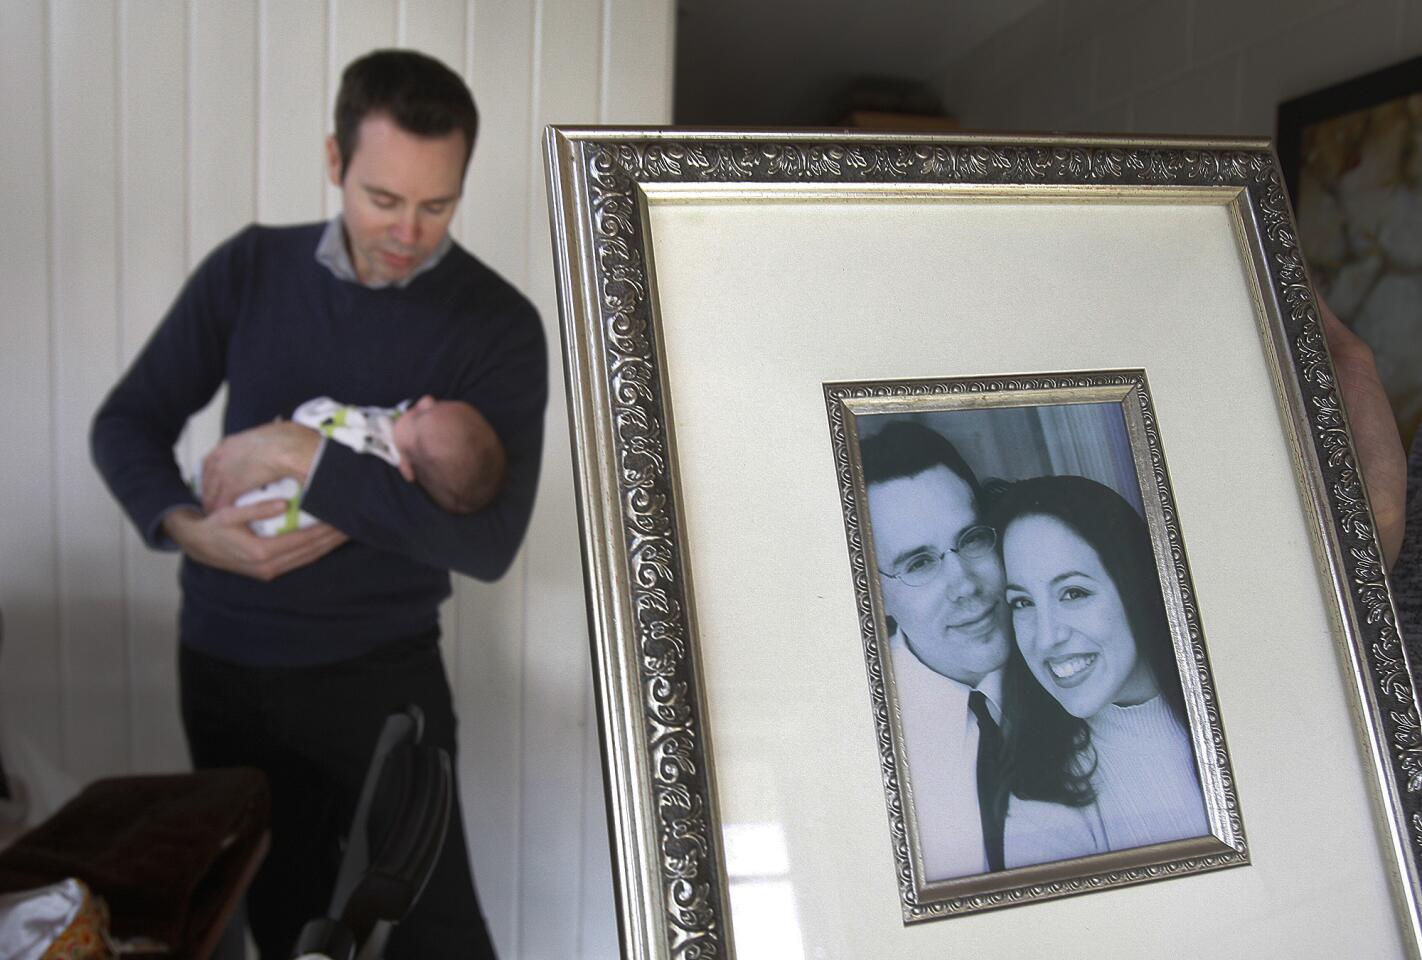 Chris Burgess, feeds his one-month-old son Colin James beyond an engagement photo of Burgess with his then-fiance Robin in 2001 at home in Burbank on Friday, Jan. 31, 2014. Robin Burgess, Chris' wife and Colin James' mom, died on January 19 after suffering a brain aneurysm on January 5, about a week after giving birth to Colin James on December 30.